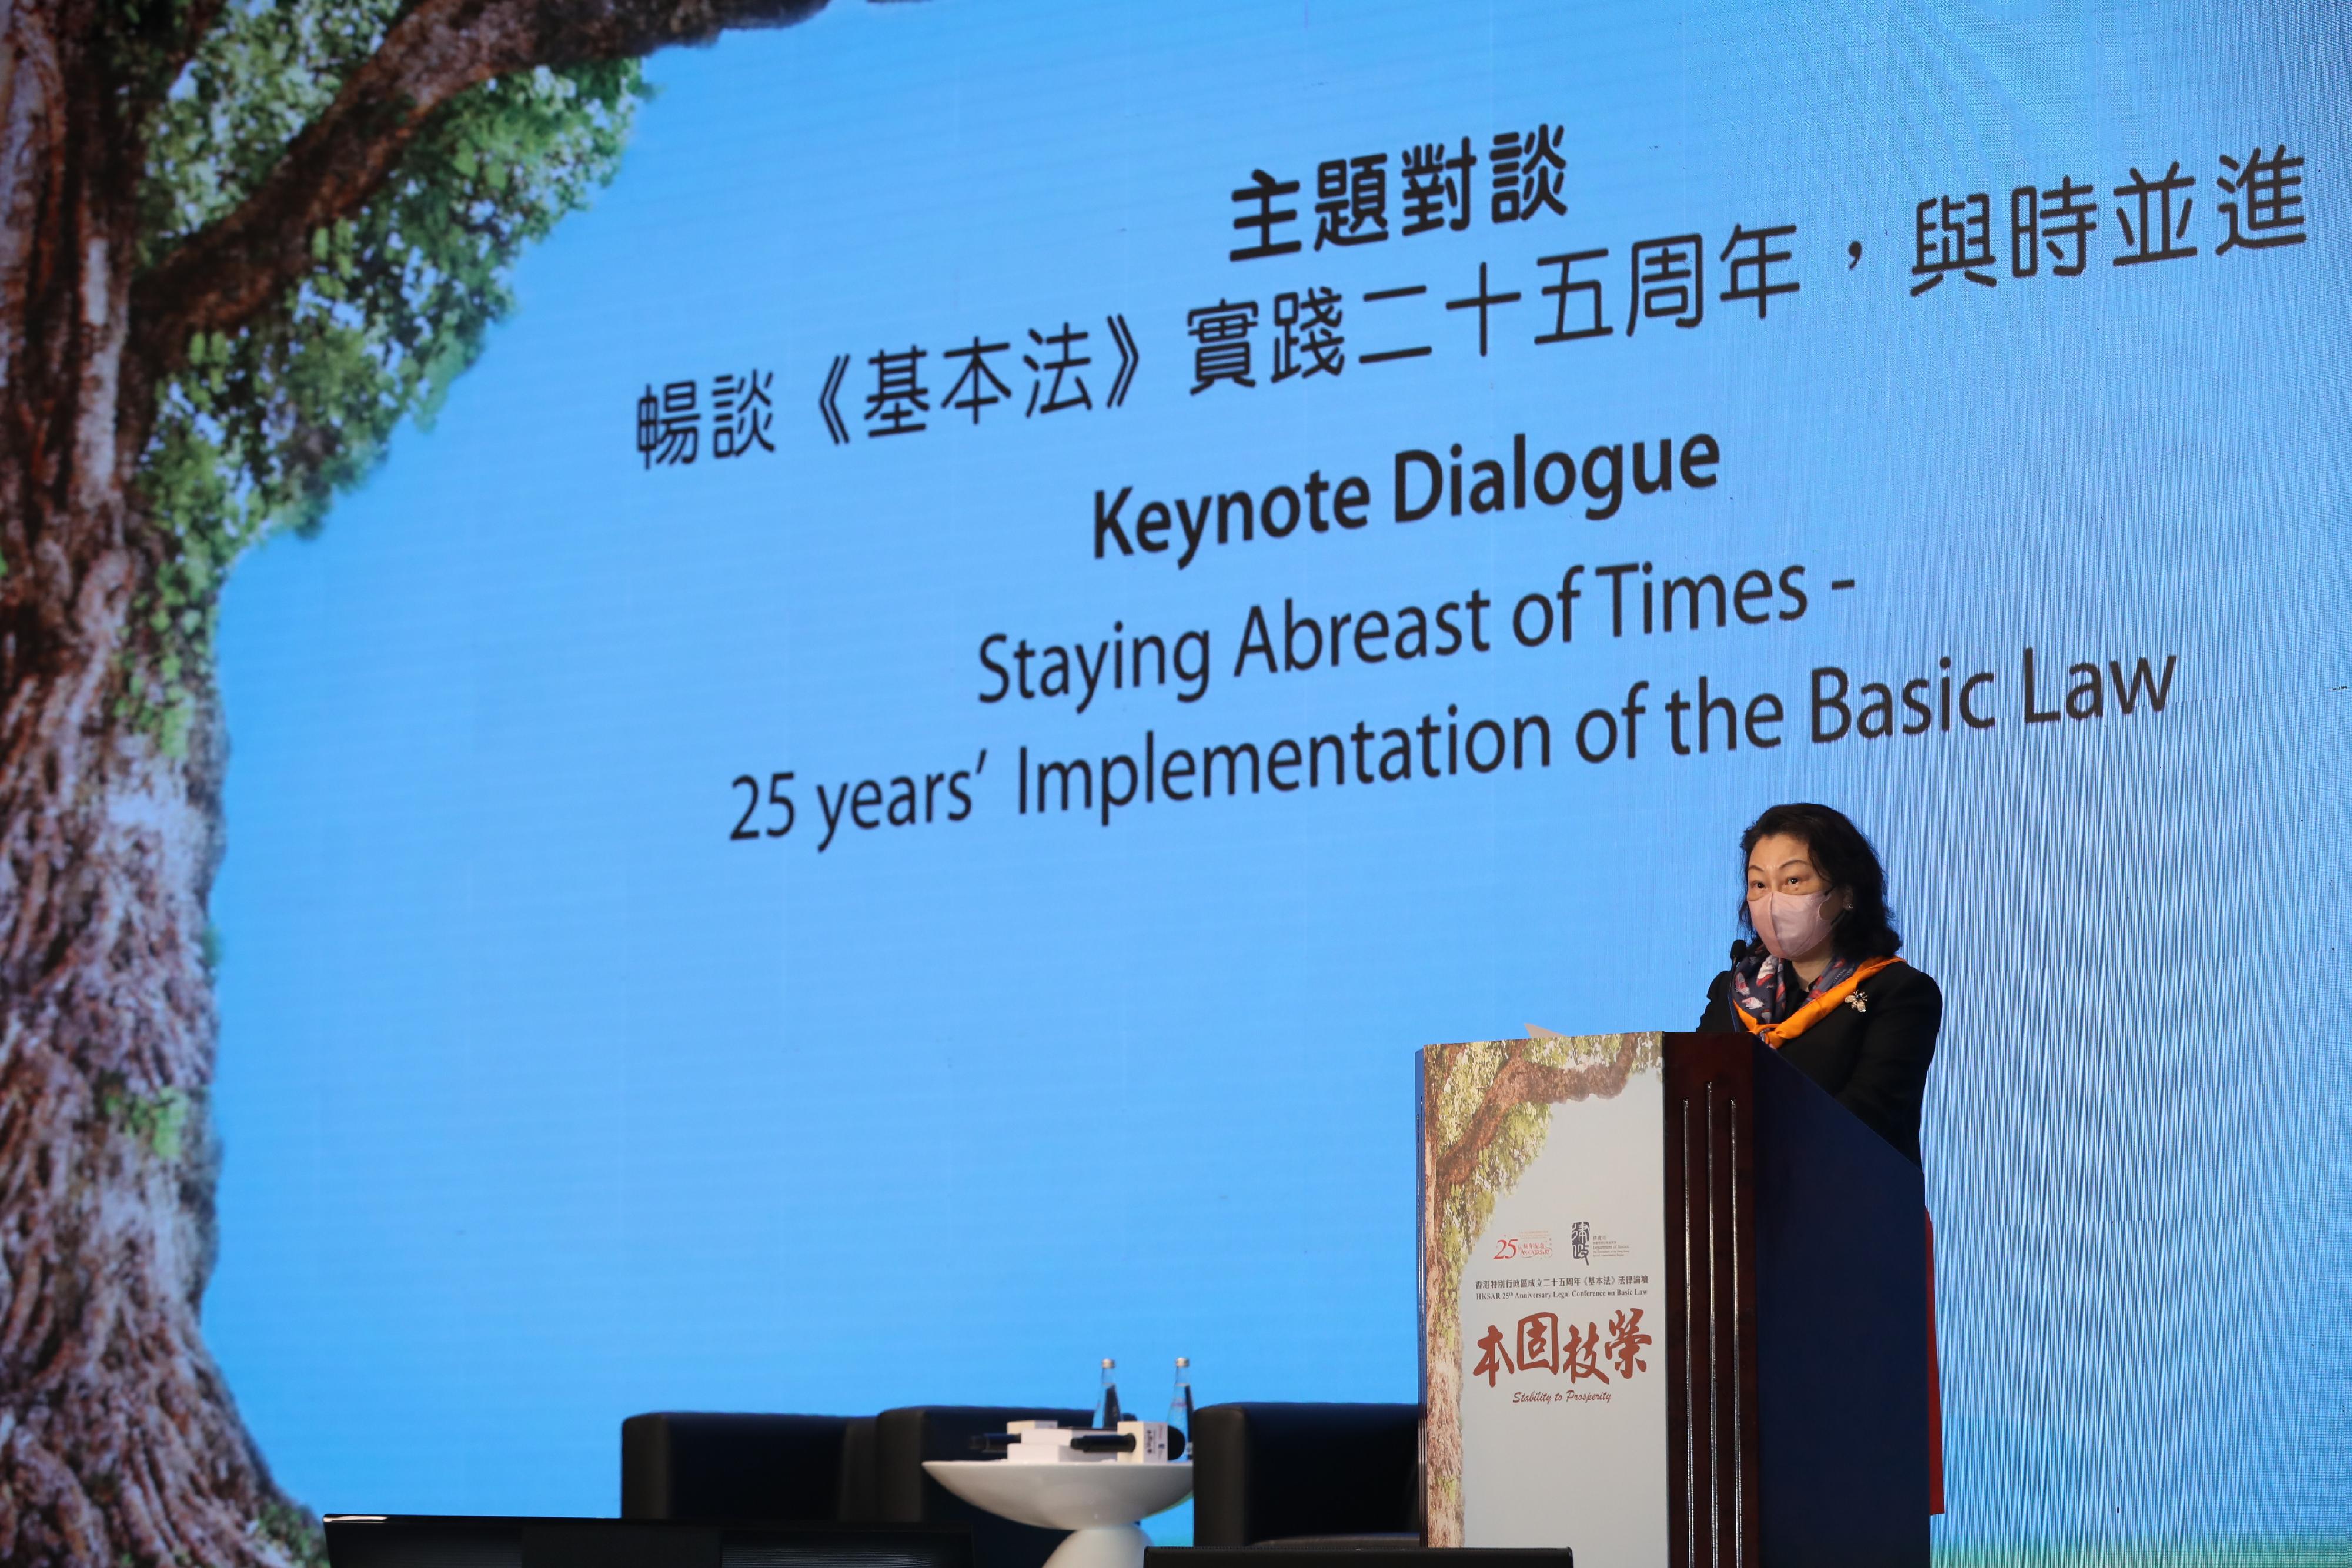 The Secretary for Justice, Ms Teresa Cheng, SC, speaks at the Hong Kong Special Administrative Region 25th Anniversary Legal Conference on Basic Law "Stability to Prosperity" today (May 27).